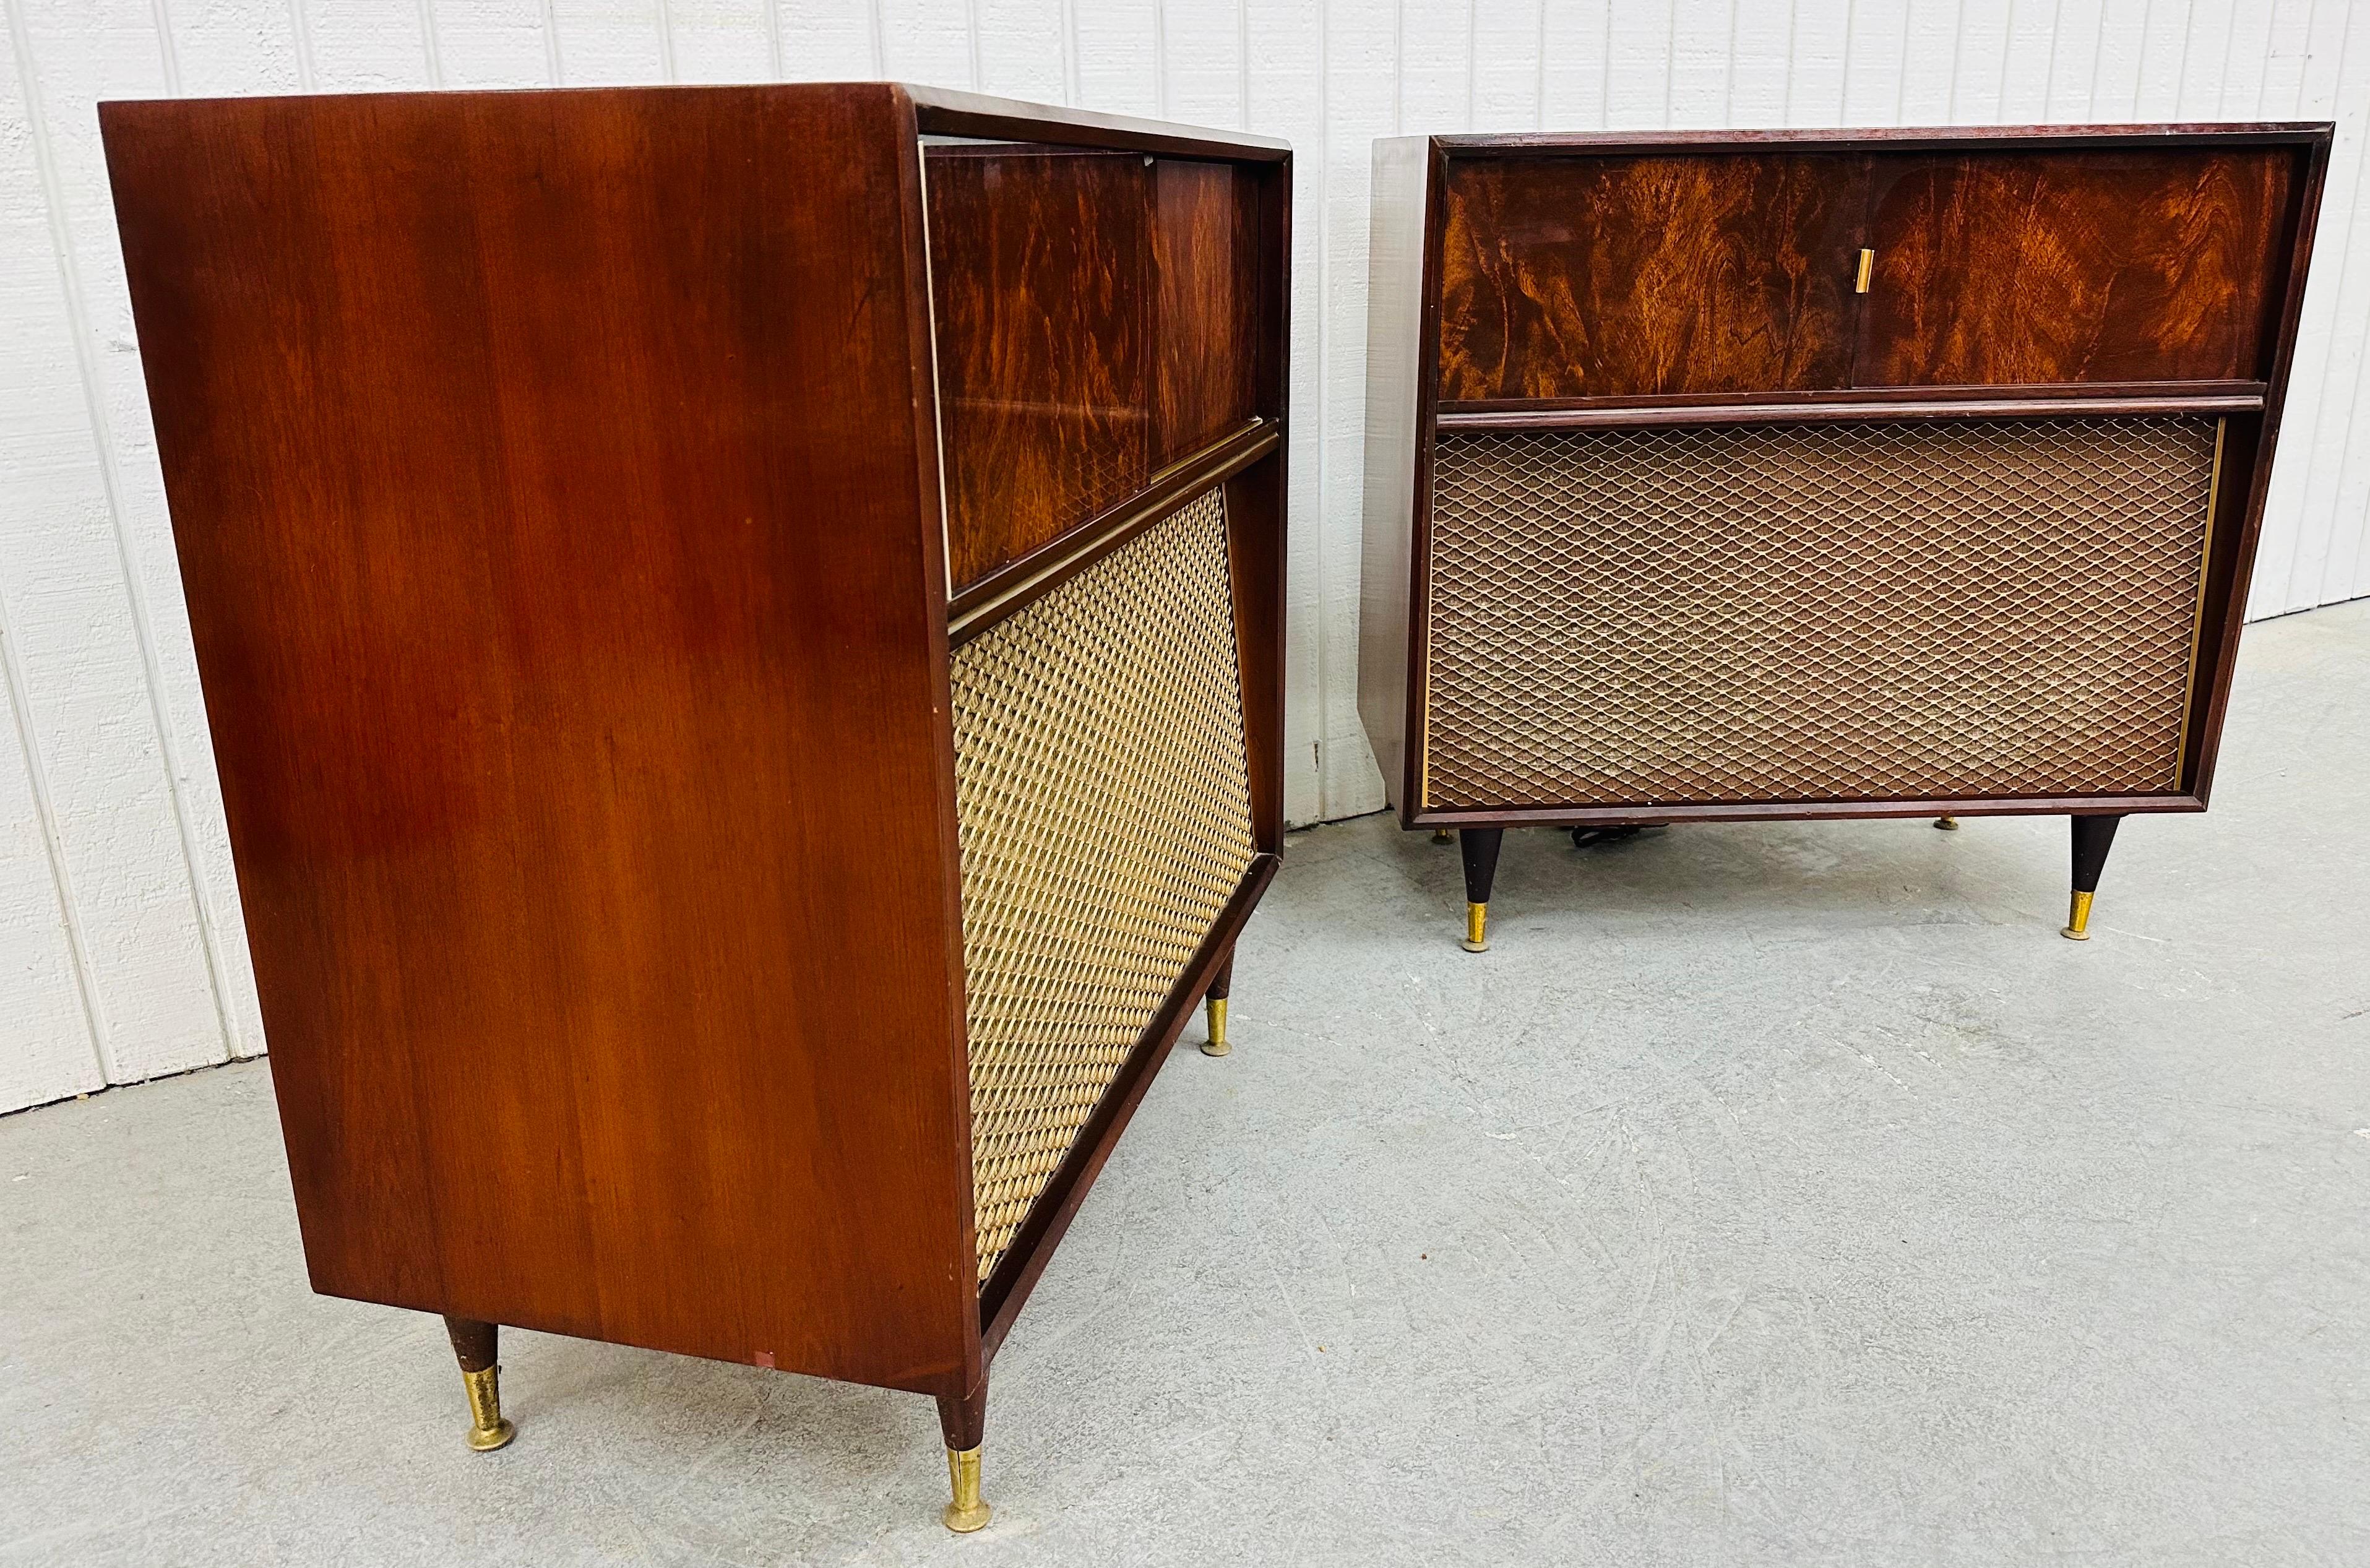 This listing is for a pair of Mid-Century Modern Magnavox Stereo Console Units. Featuring a straight line design, sliding doors that reveal different components, front speakers, modern legs with gold caps, and a mahogany finish. This is an